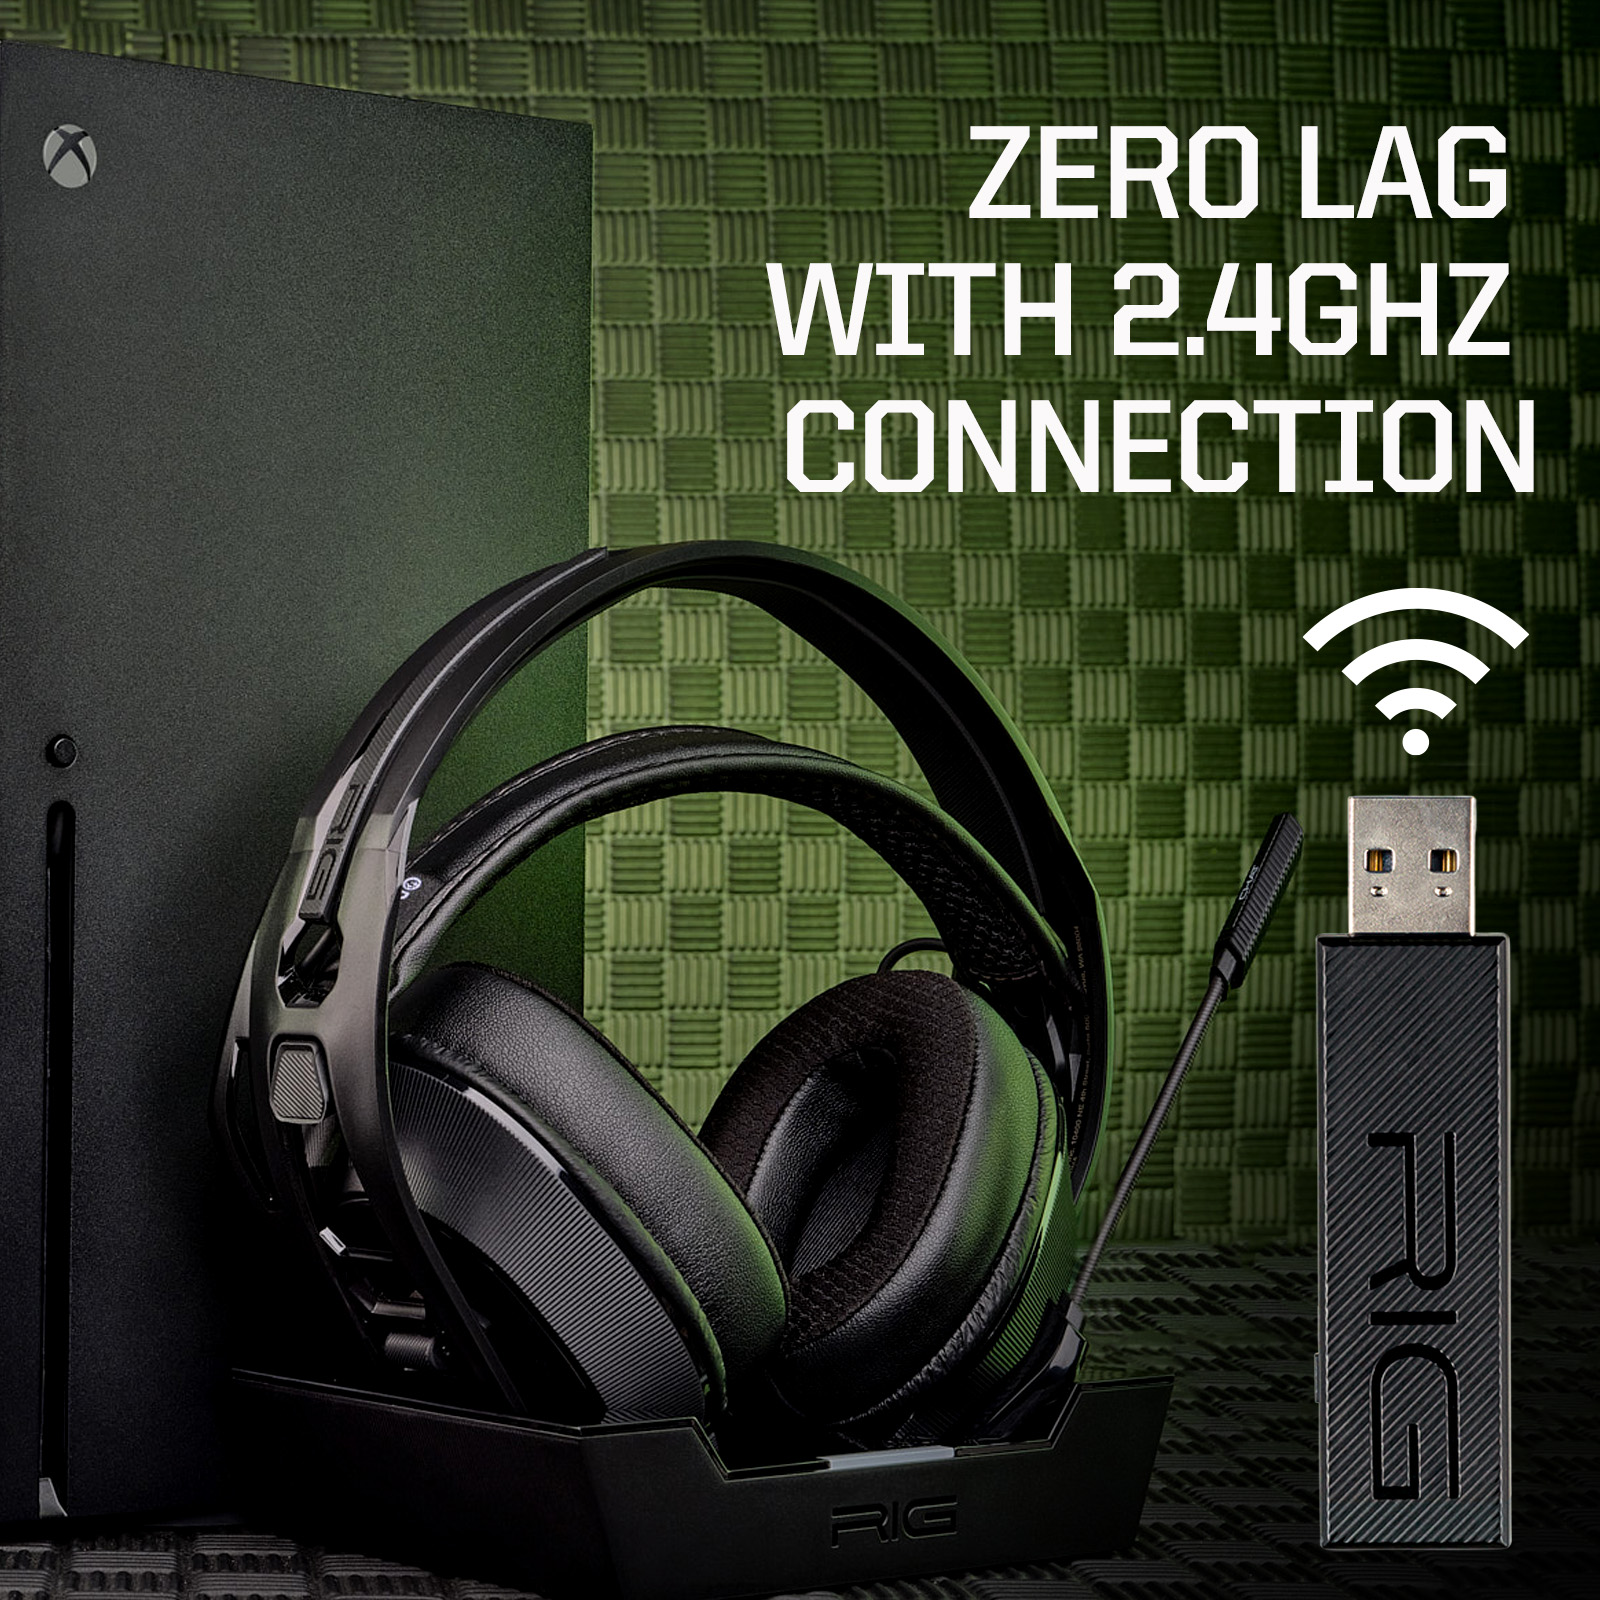 RIG 800 PRO HX Wireless Gaming Headset and Base Station for Xbox One, X/S, PlayStation & PC - Black - image 4 of 14